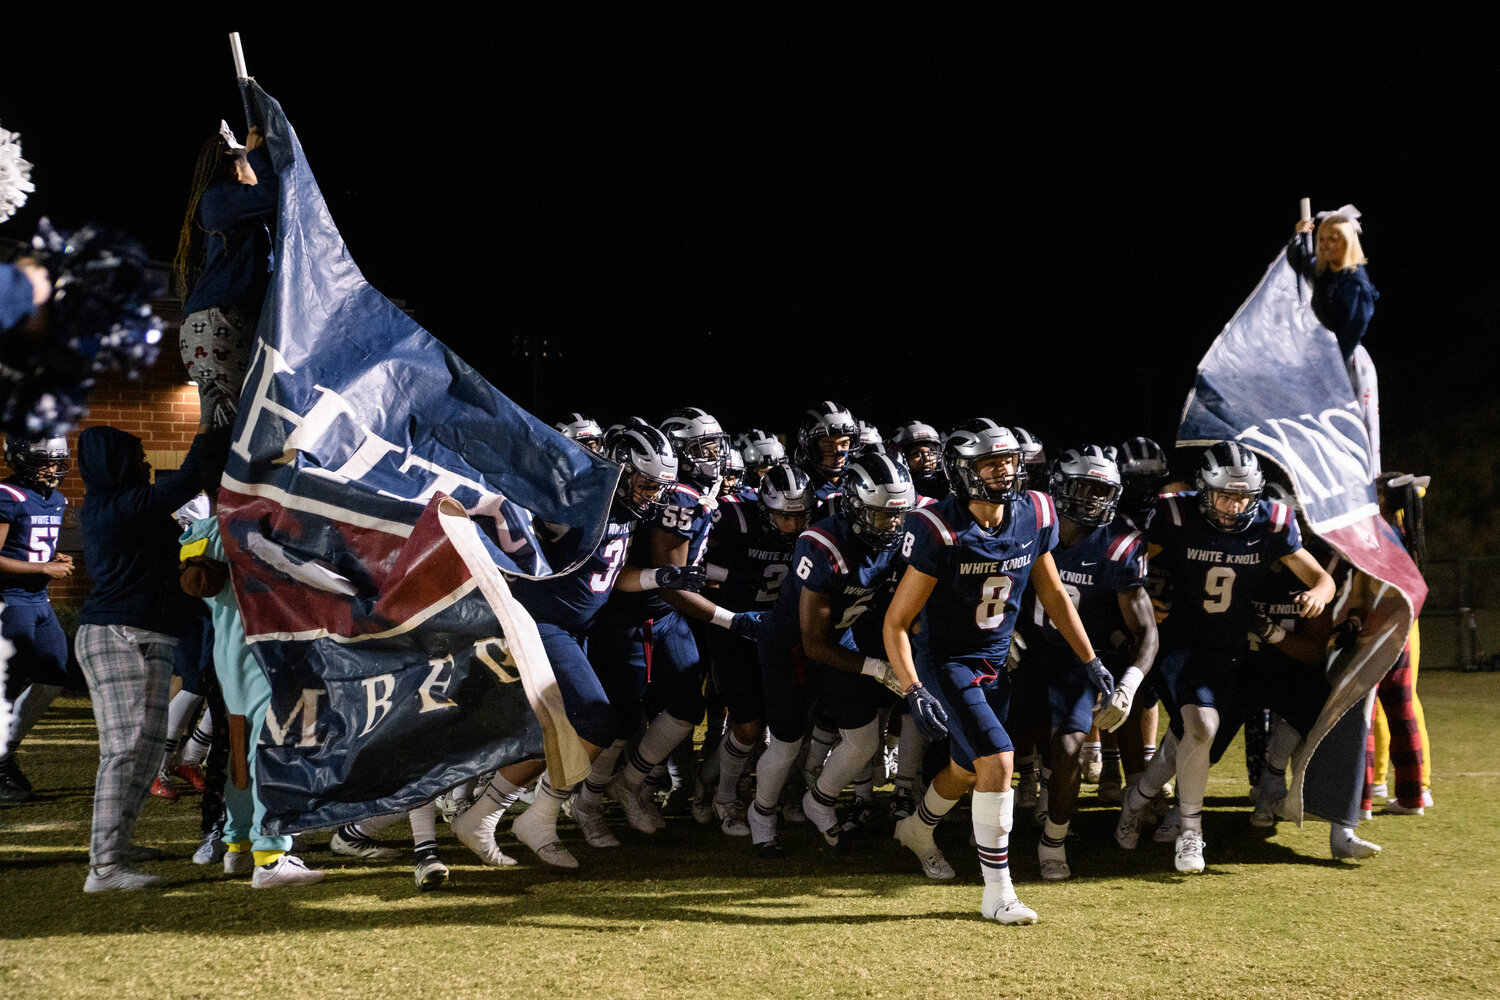 The White Knoll Timberwolves’ undefeated season continued with a 28-0 shutout of Cane Bay Nov. 3.